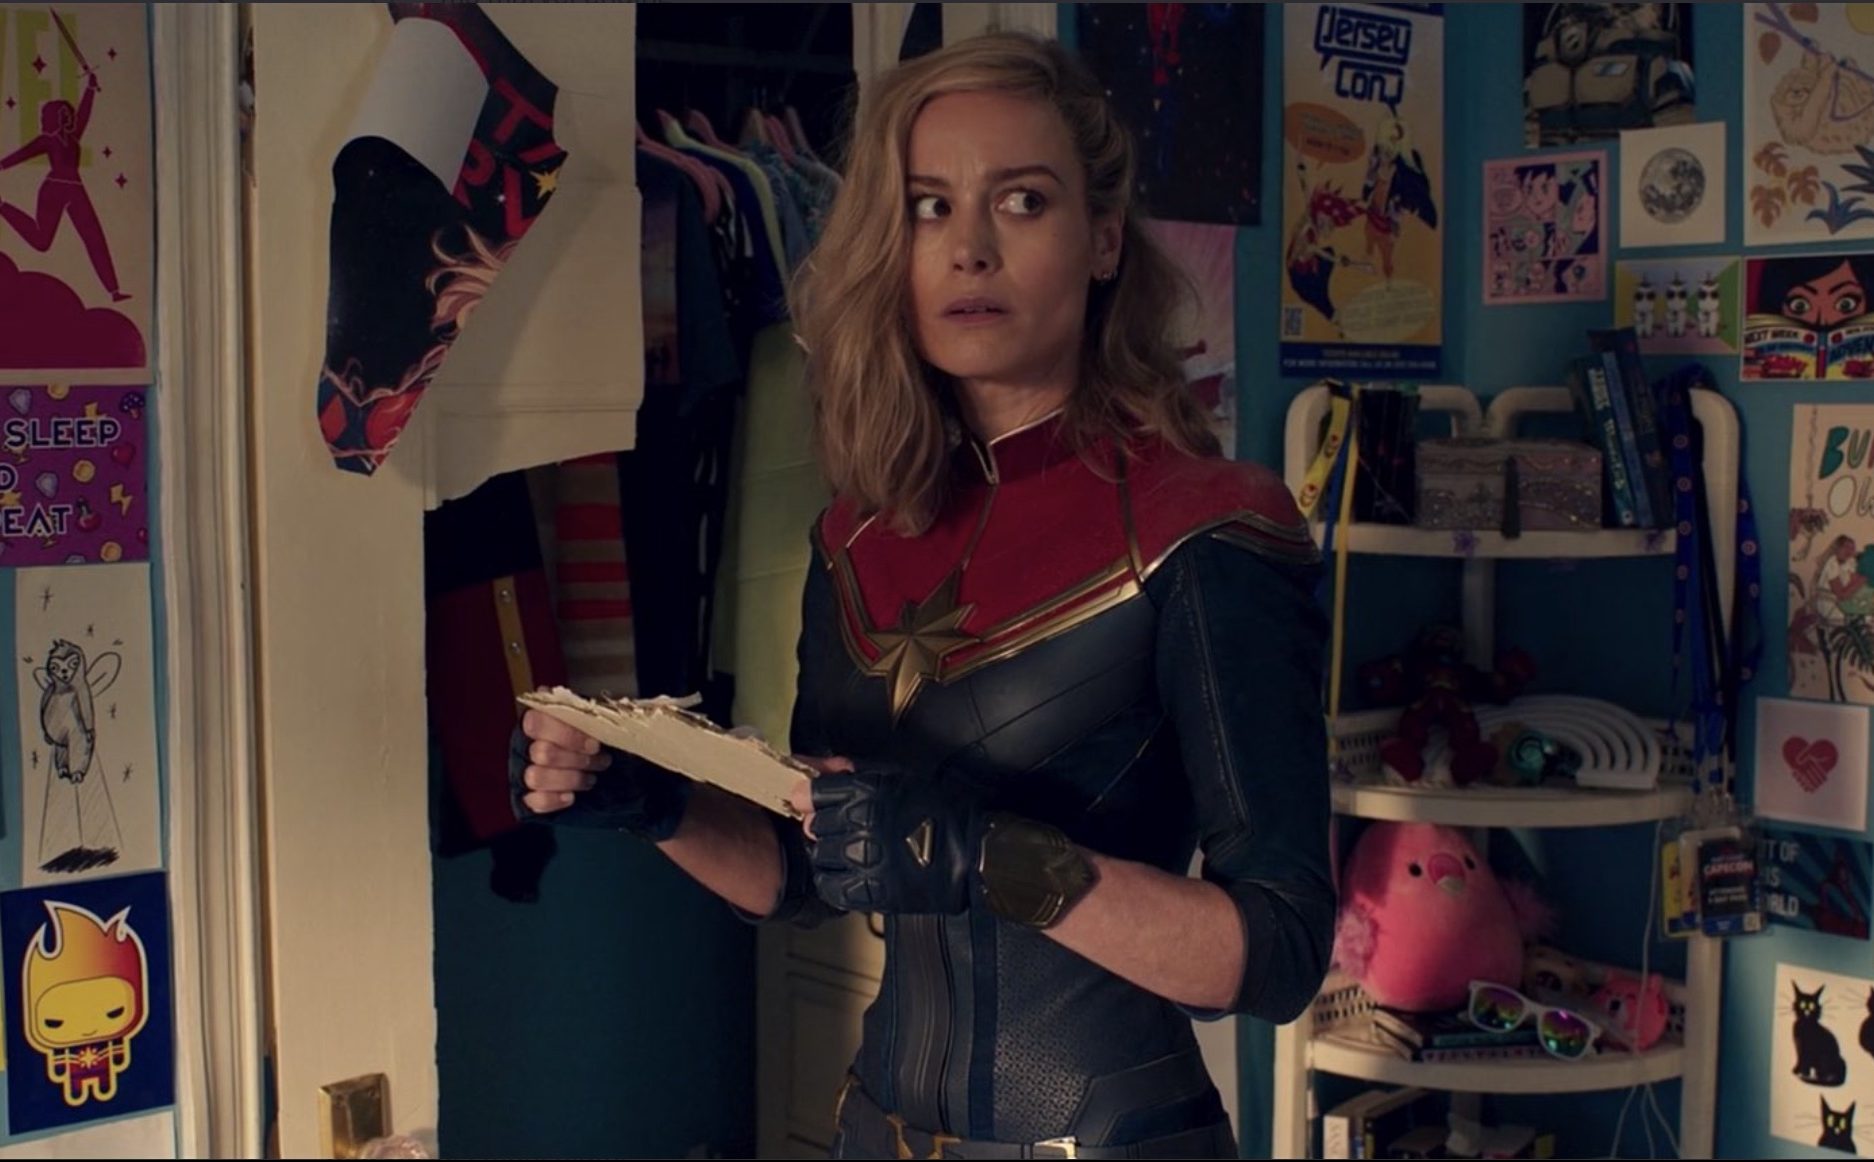 Brie Larson's Captain Marvel stands in a teen girl's bedroom, looking confused in a post-credits scene from the 'Ms. Marvel' finale